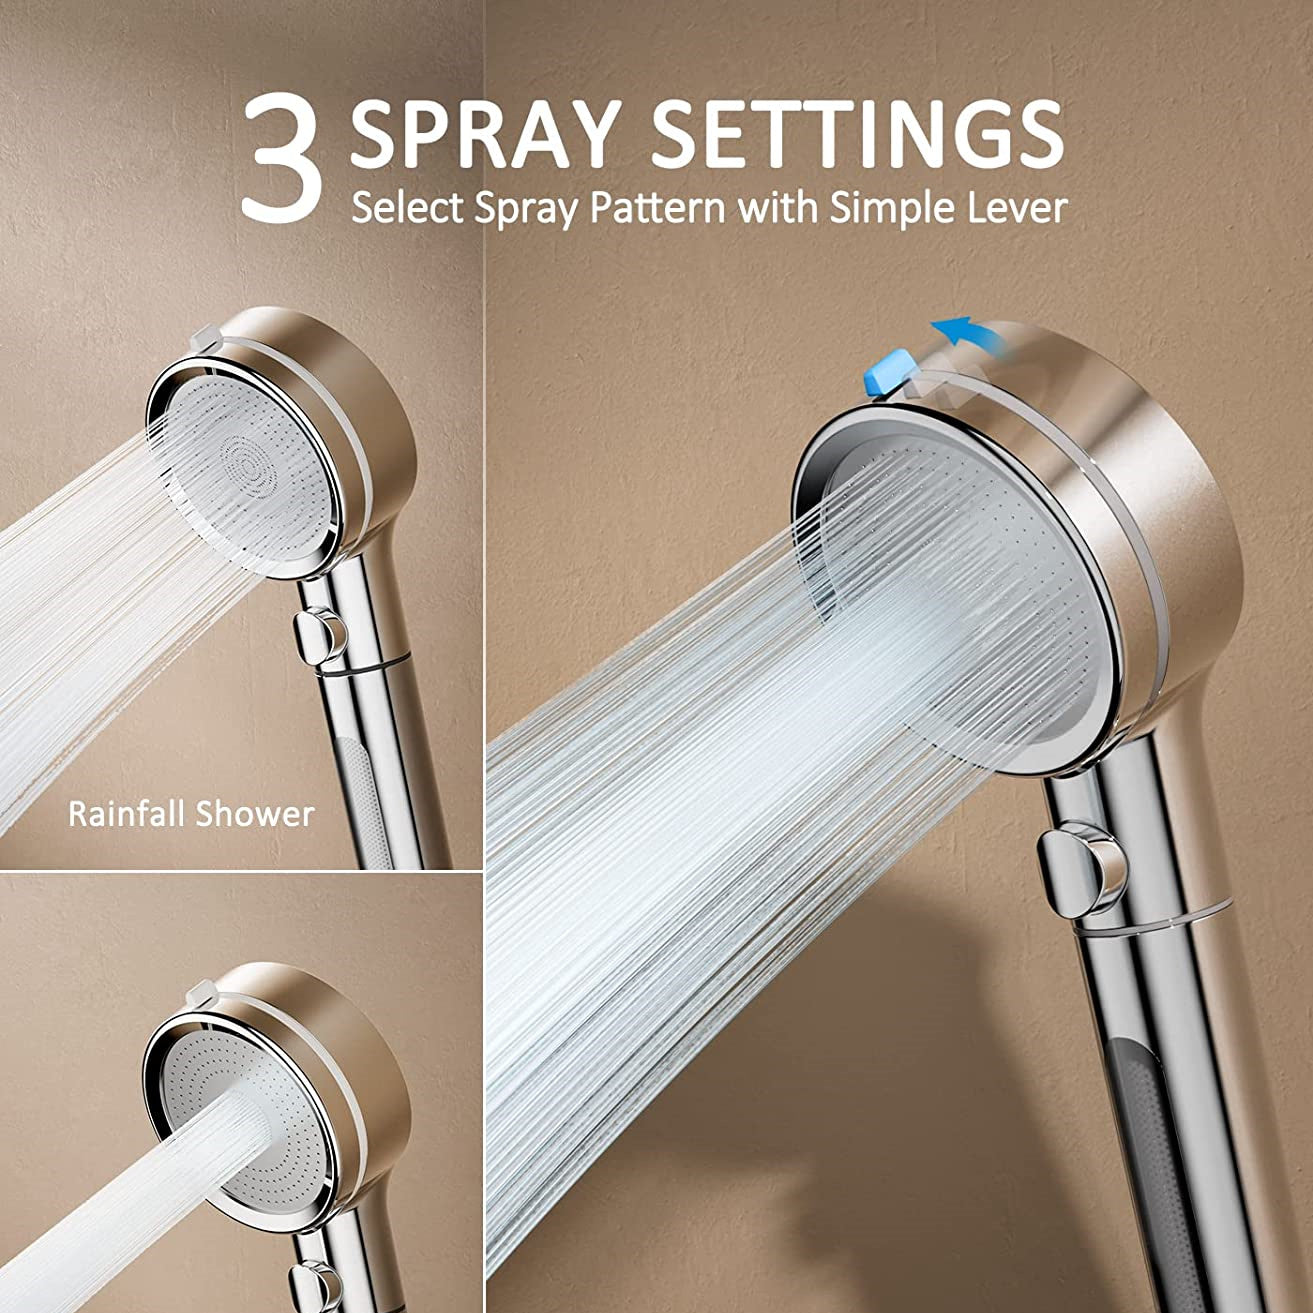 High Pressure Filtered Shower Head Handheld With ON OFF Switch, 3 Spray Setting Modes Without Hose